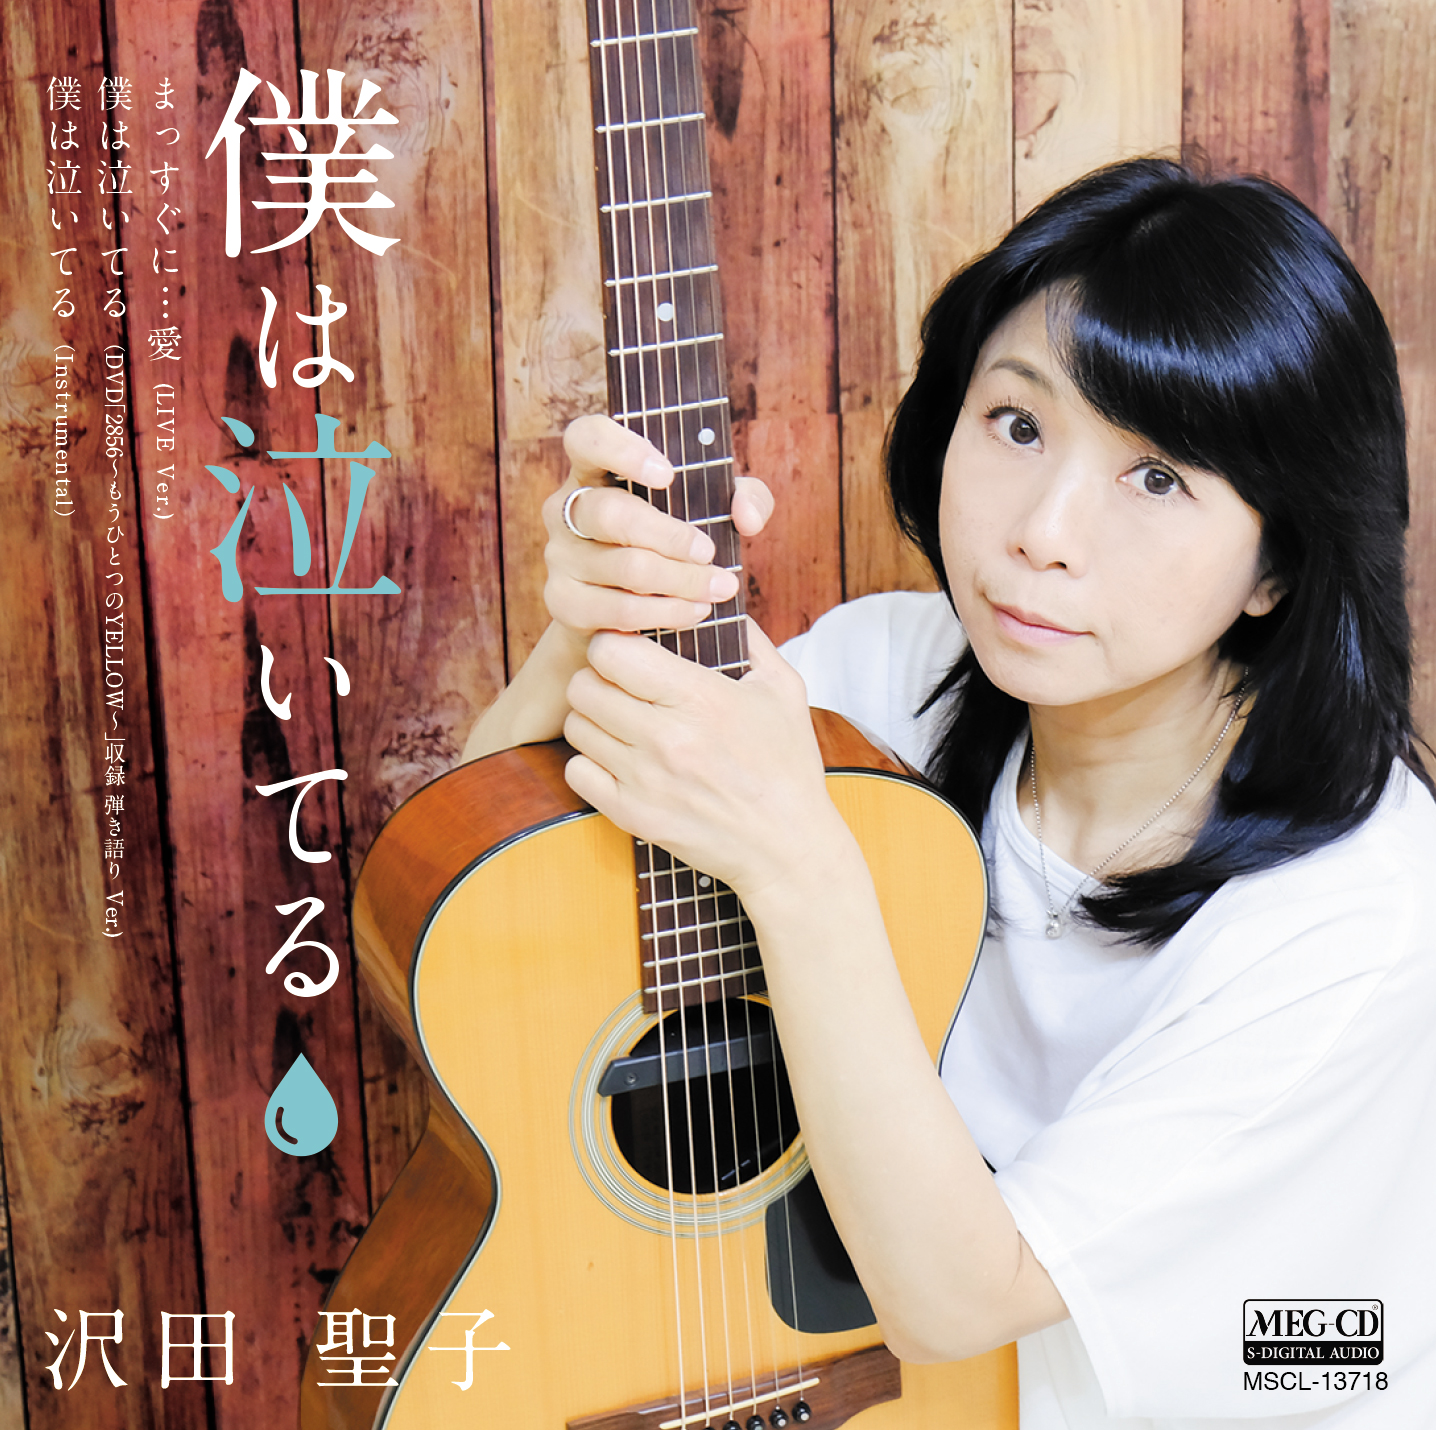 discography | 沢田聖子 In My Room